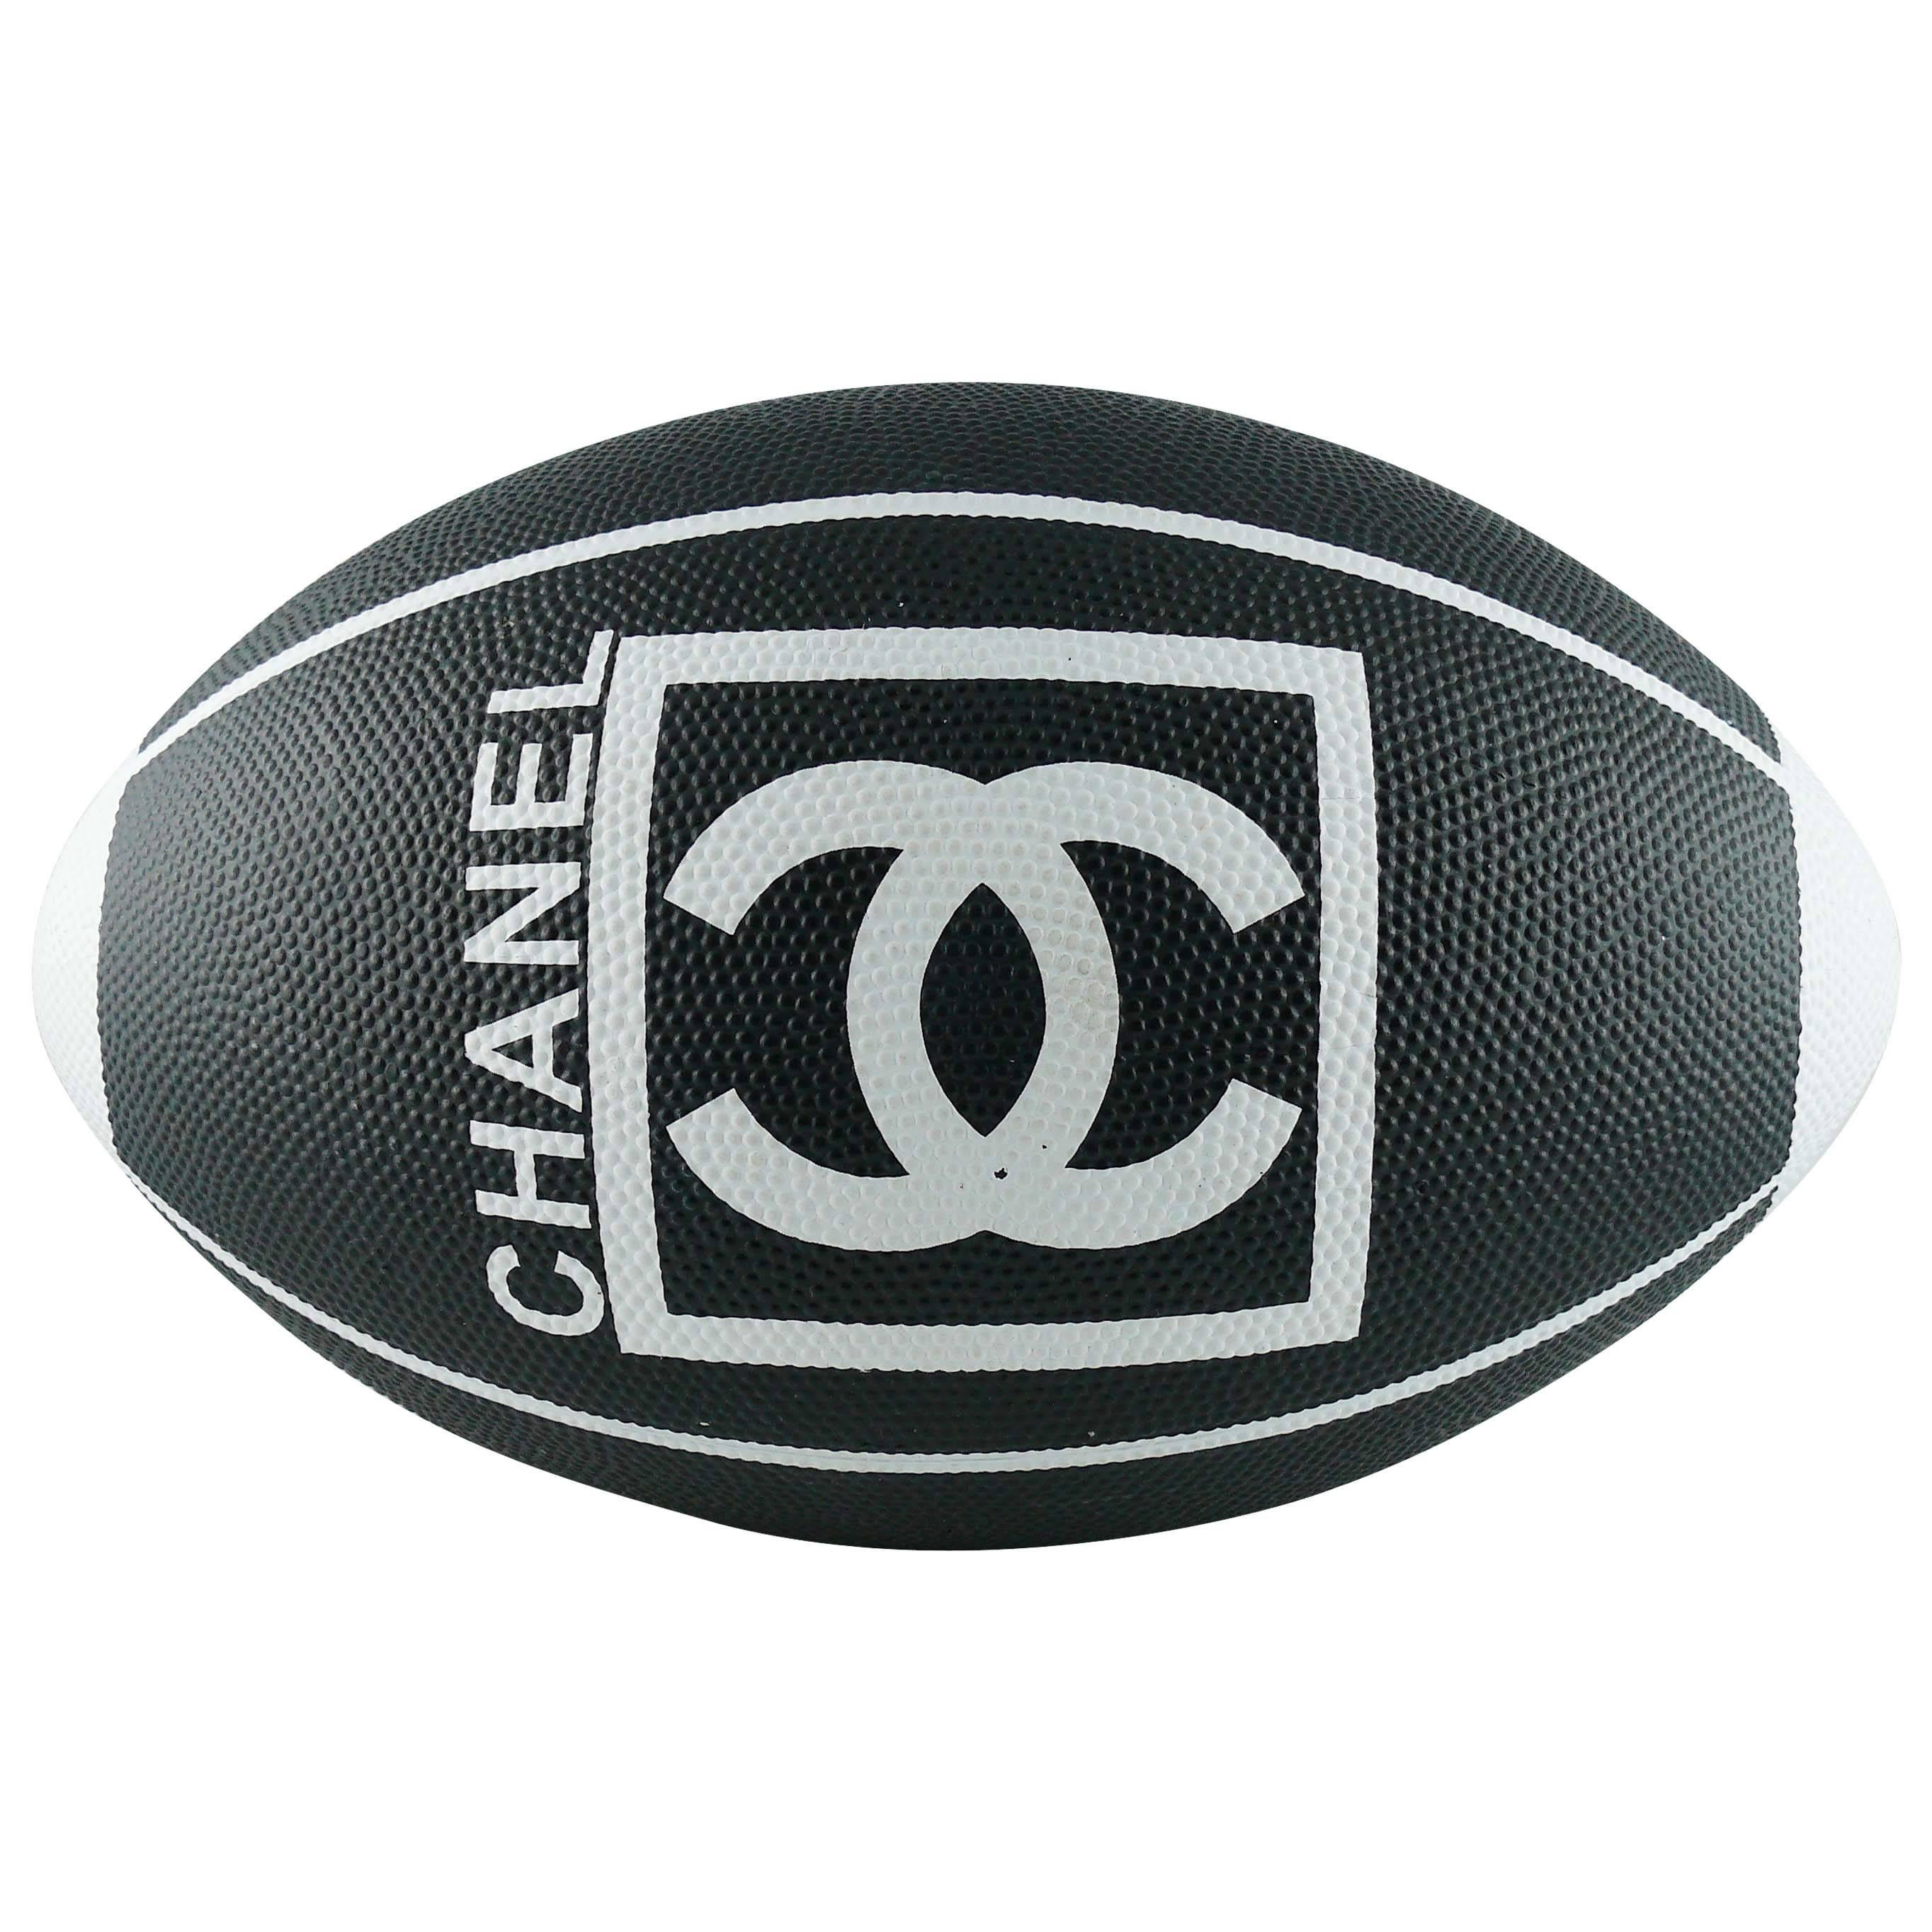 Chanel Rare Collector Limited Edition Rubber Rugby Ball 2007